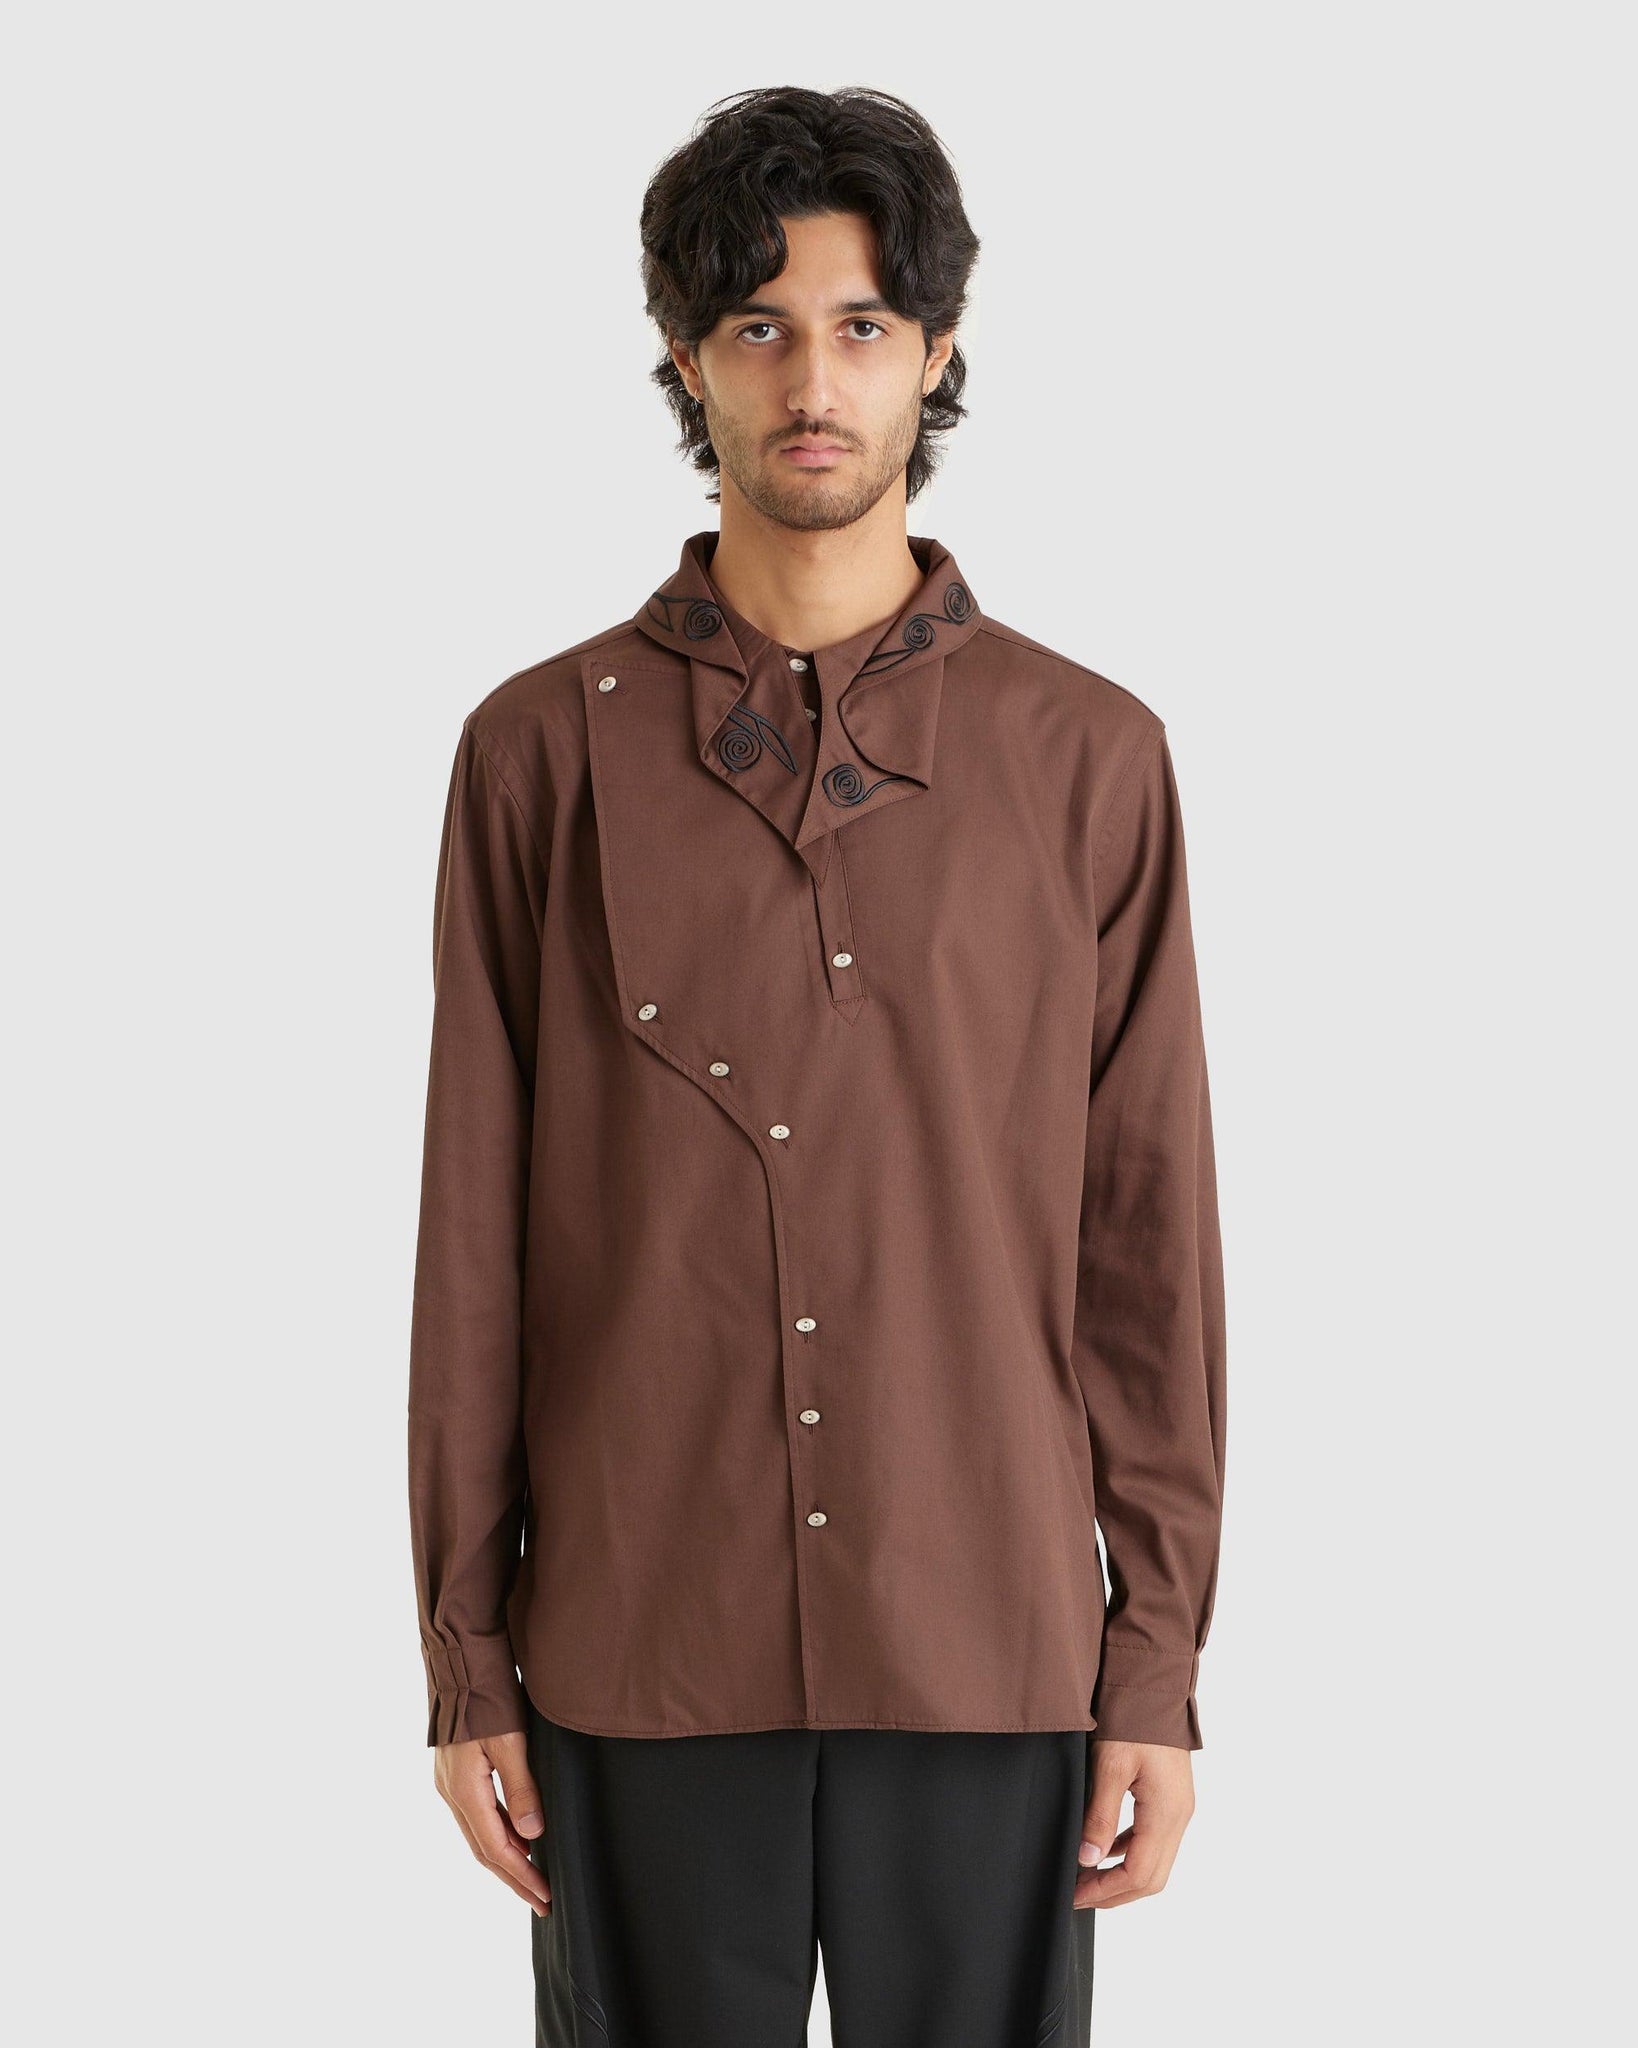 Nesebur Embroidered Shirt - {{ collection.title }} - Chinatown Country Club 